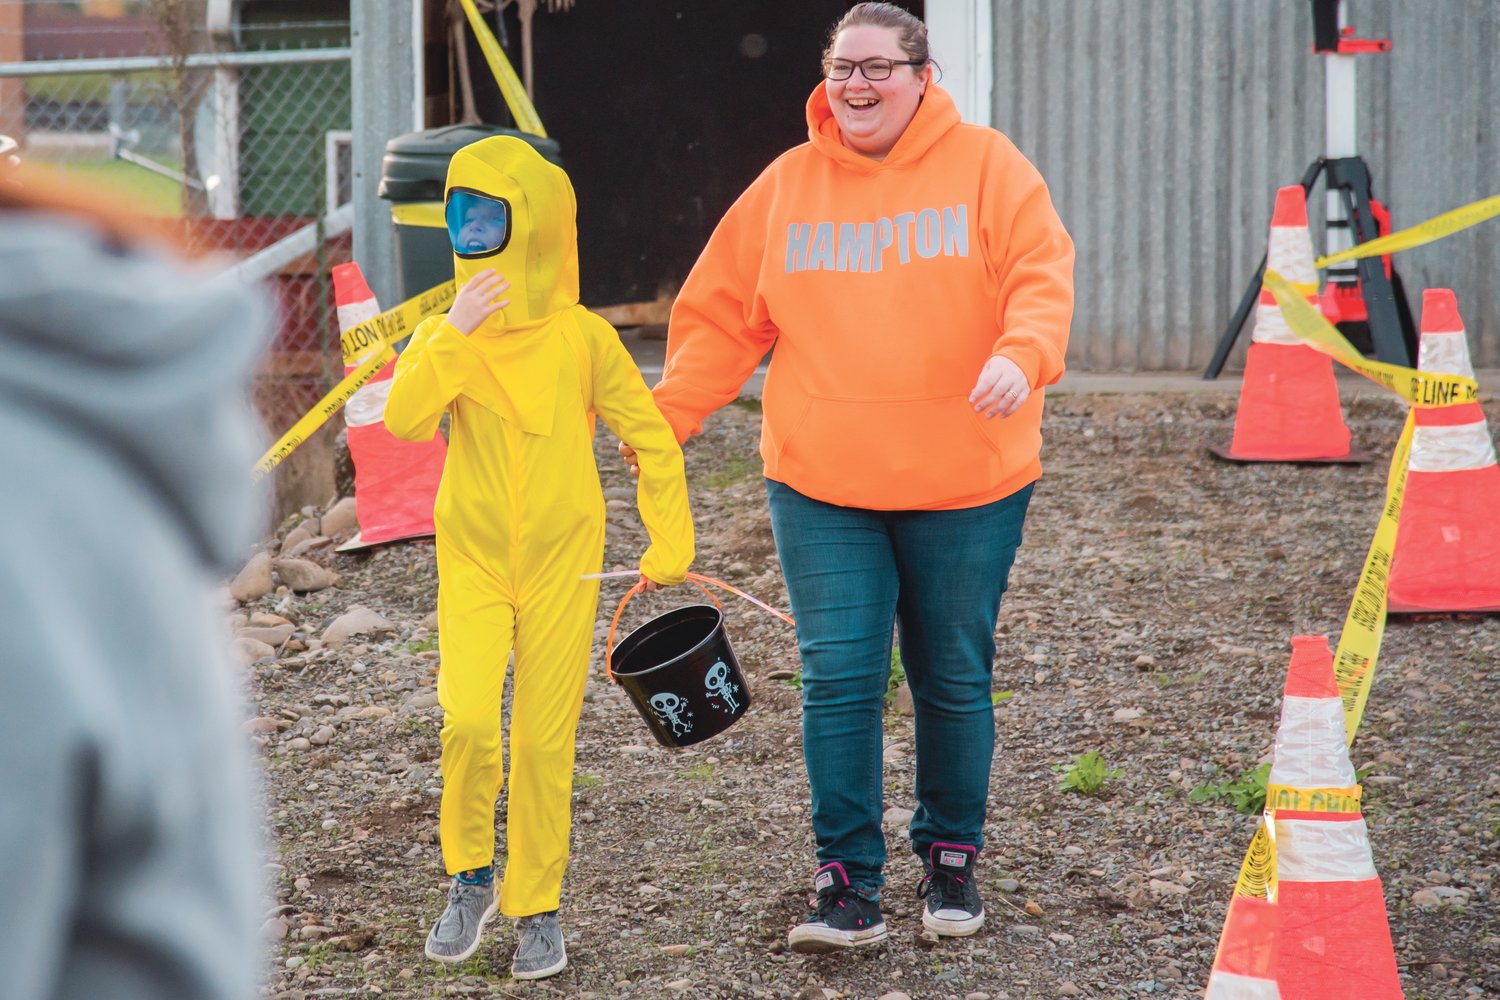 Maddie, 9, fixes her head after taking a walk through the Lewis County Fire District #4 Haunted House in Morton while dressed as a crewmate from "Among Us" on Halloween.